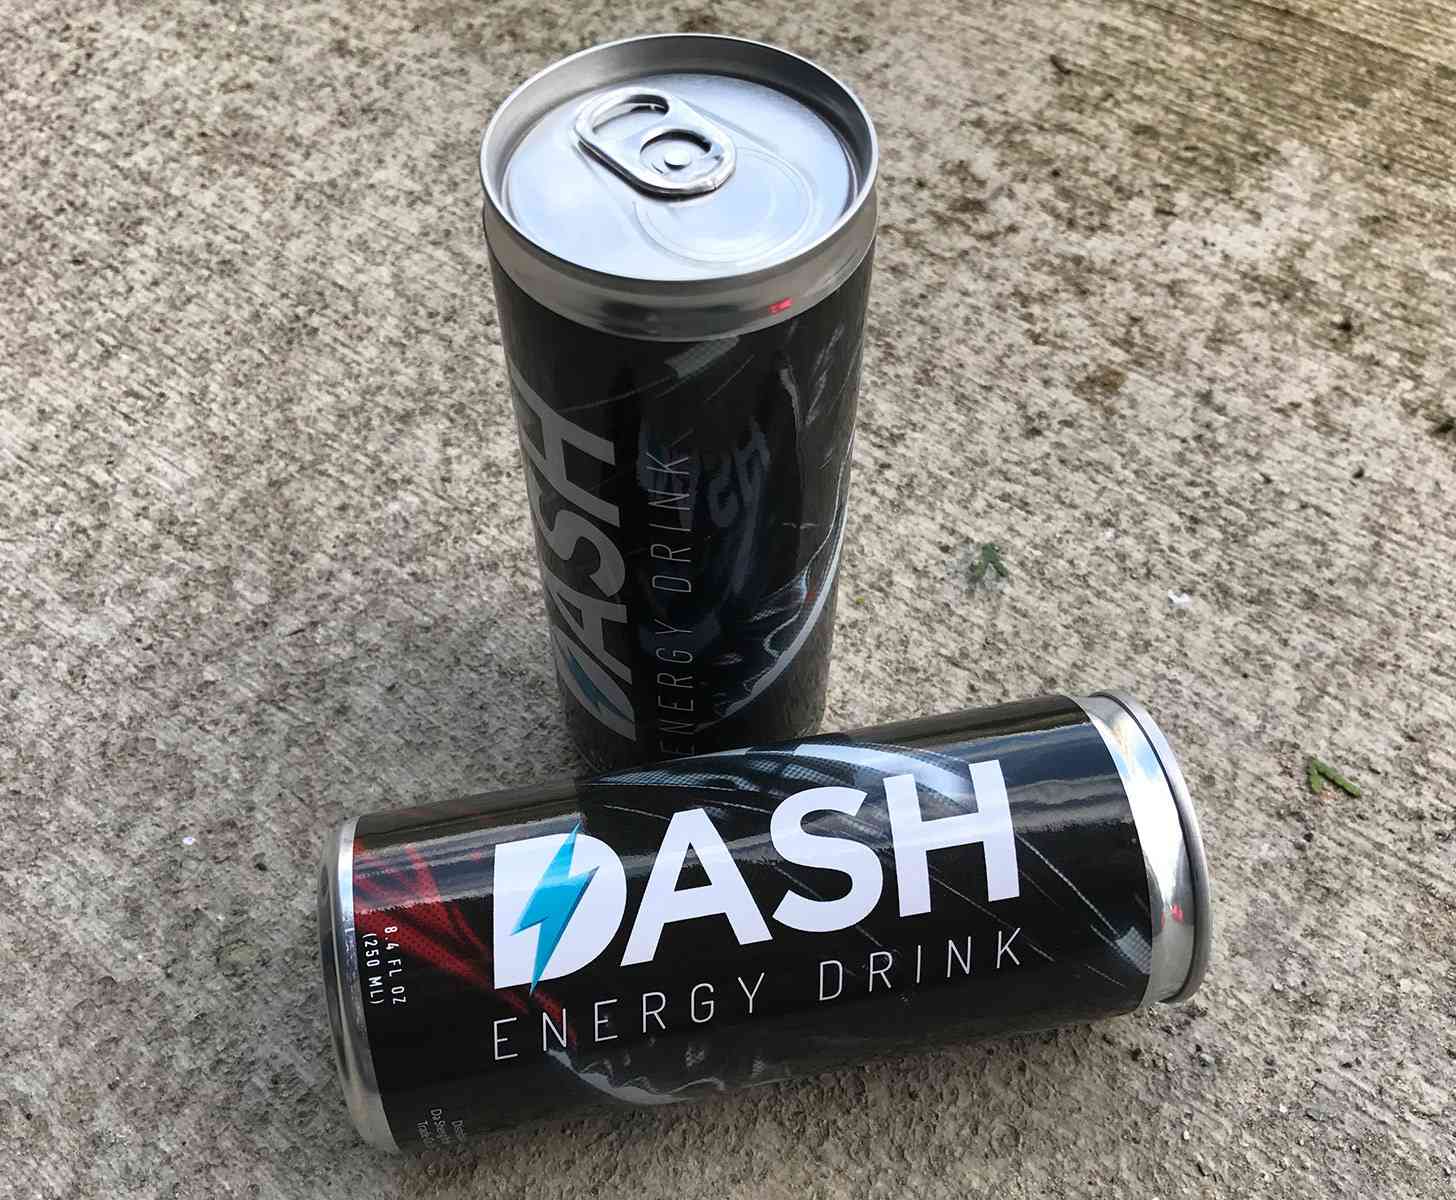 OnePlus Dash Energy drink April Fools' Day 2017